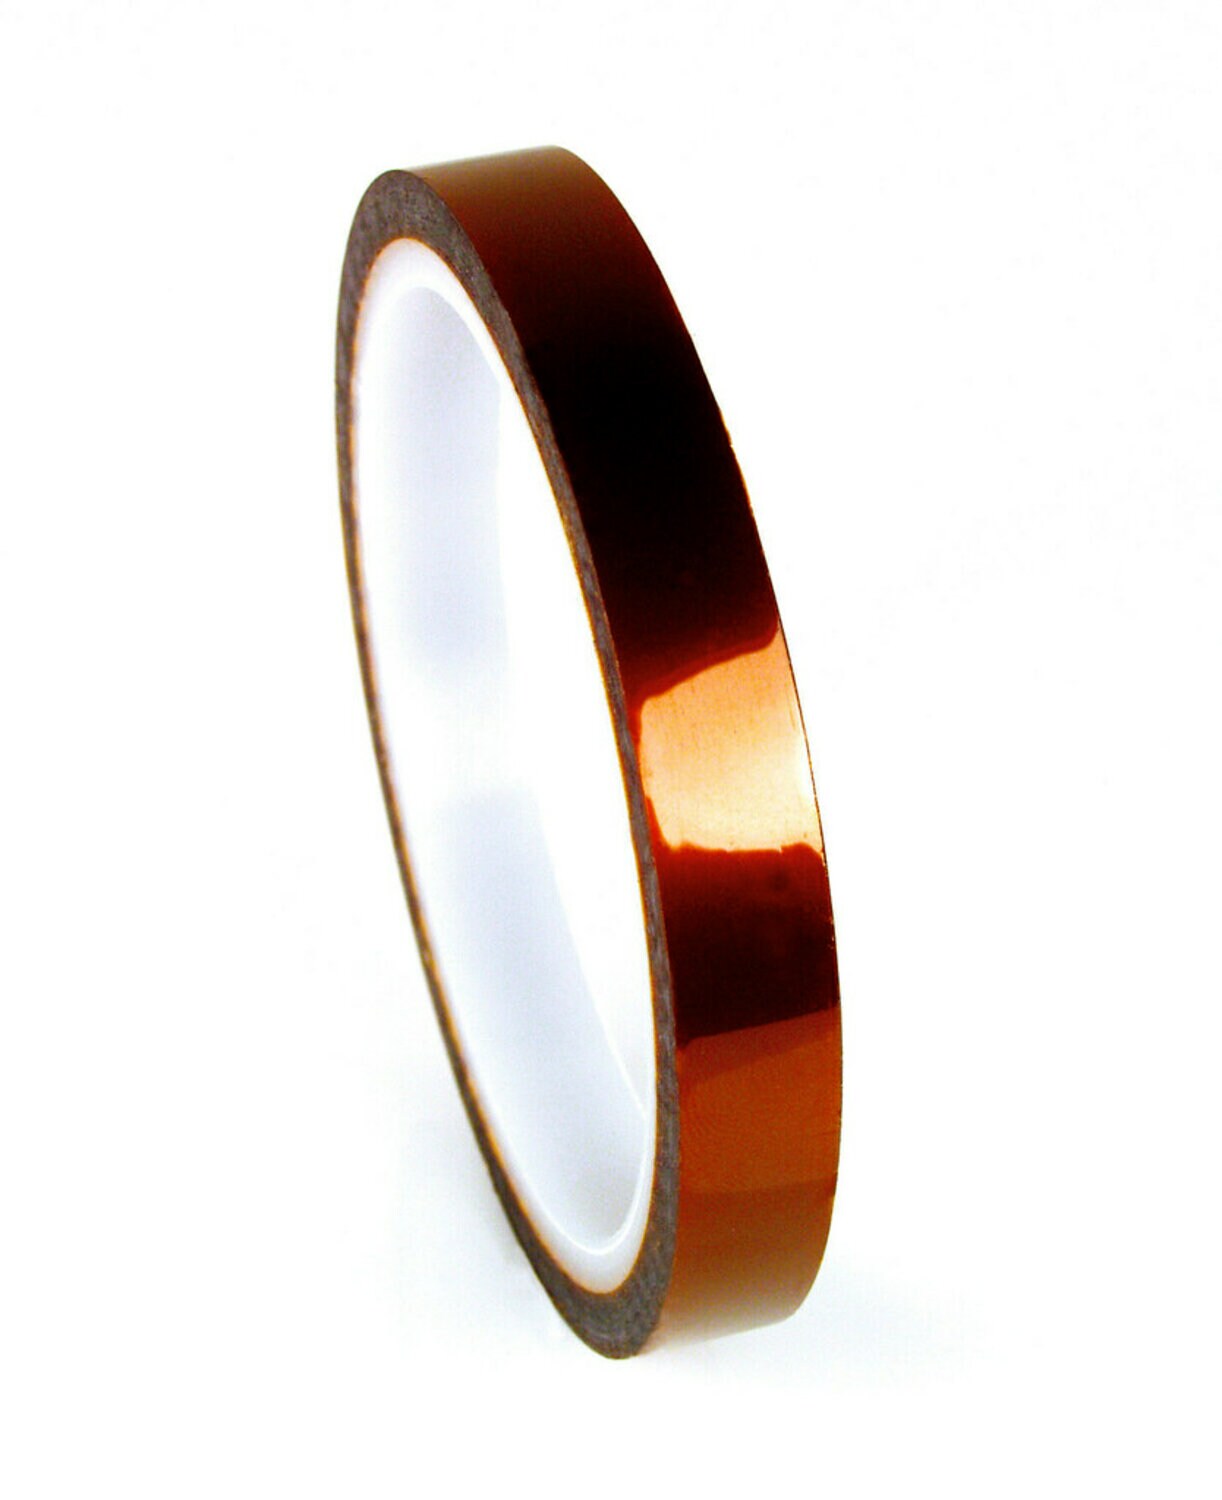 7010303999 - 3M Polyimide Film Electrical Tape 1205, Amber, Acrylic Adhesive, 1 mil
film, 1/4 in x 36 yd (6,35 mm x 33 m), 36/Case